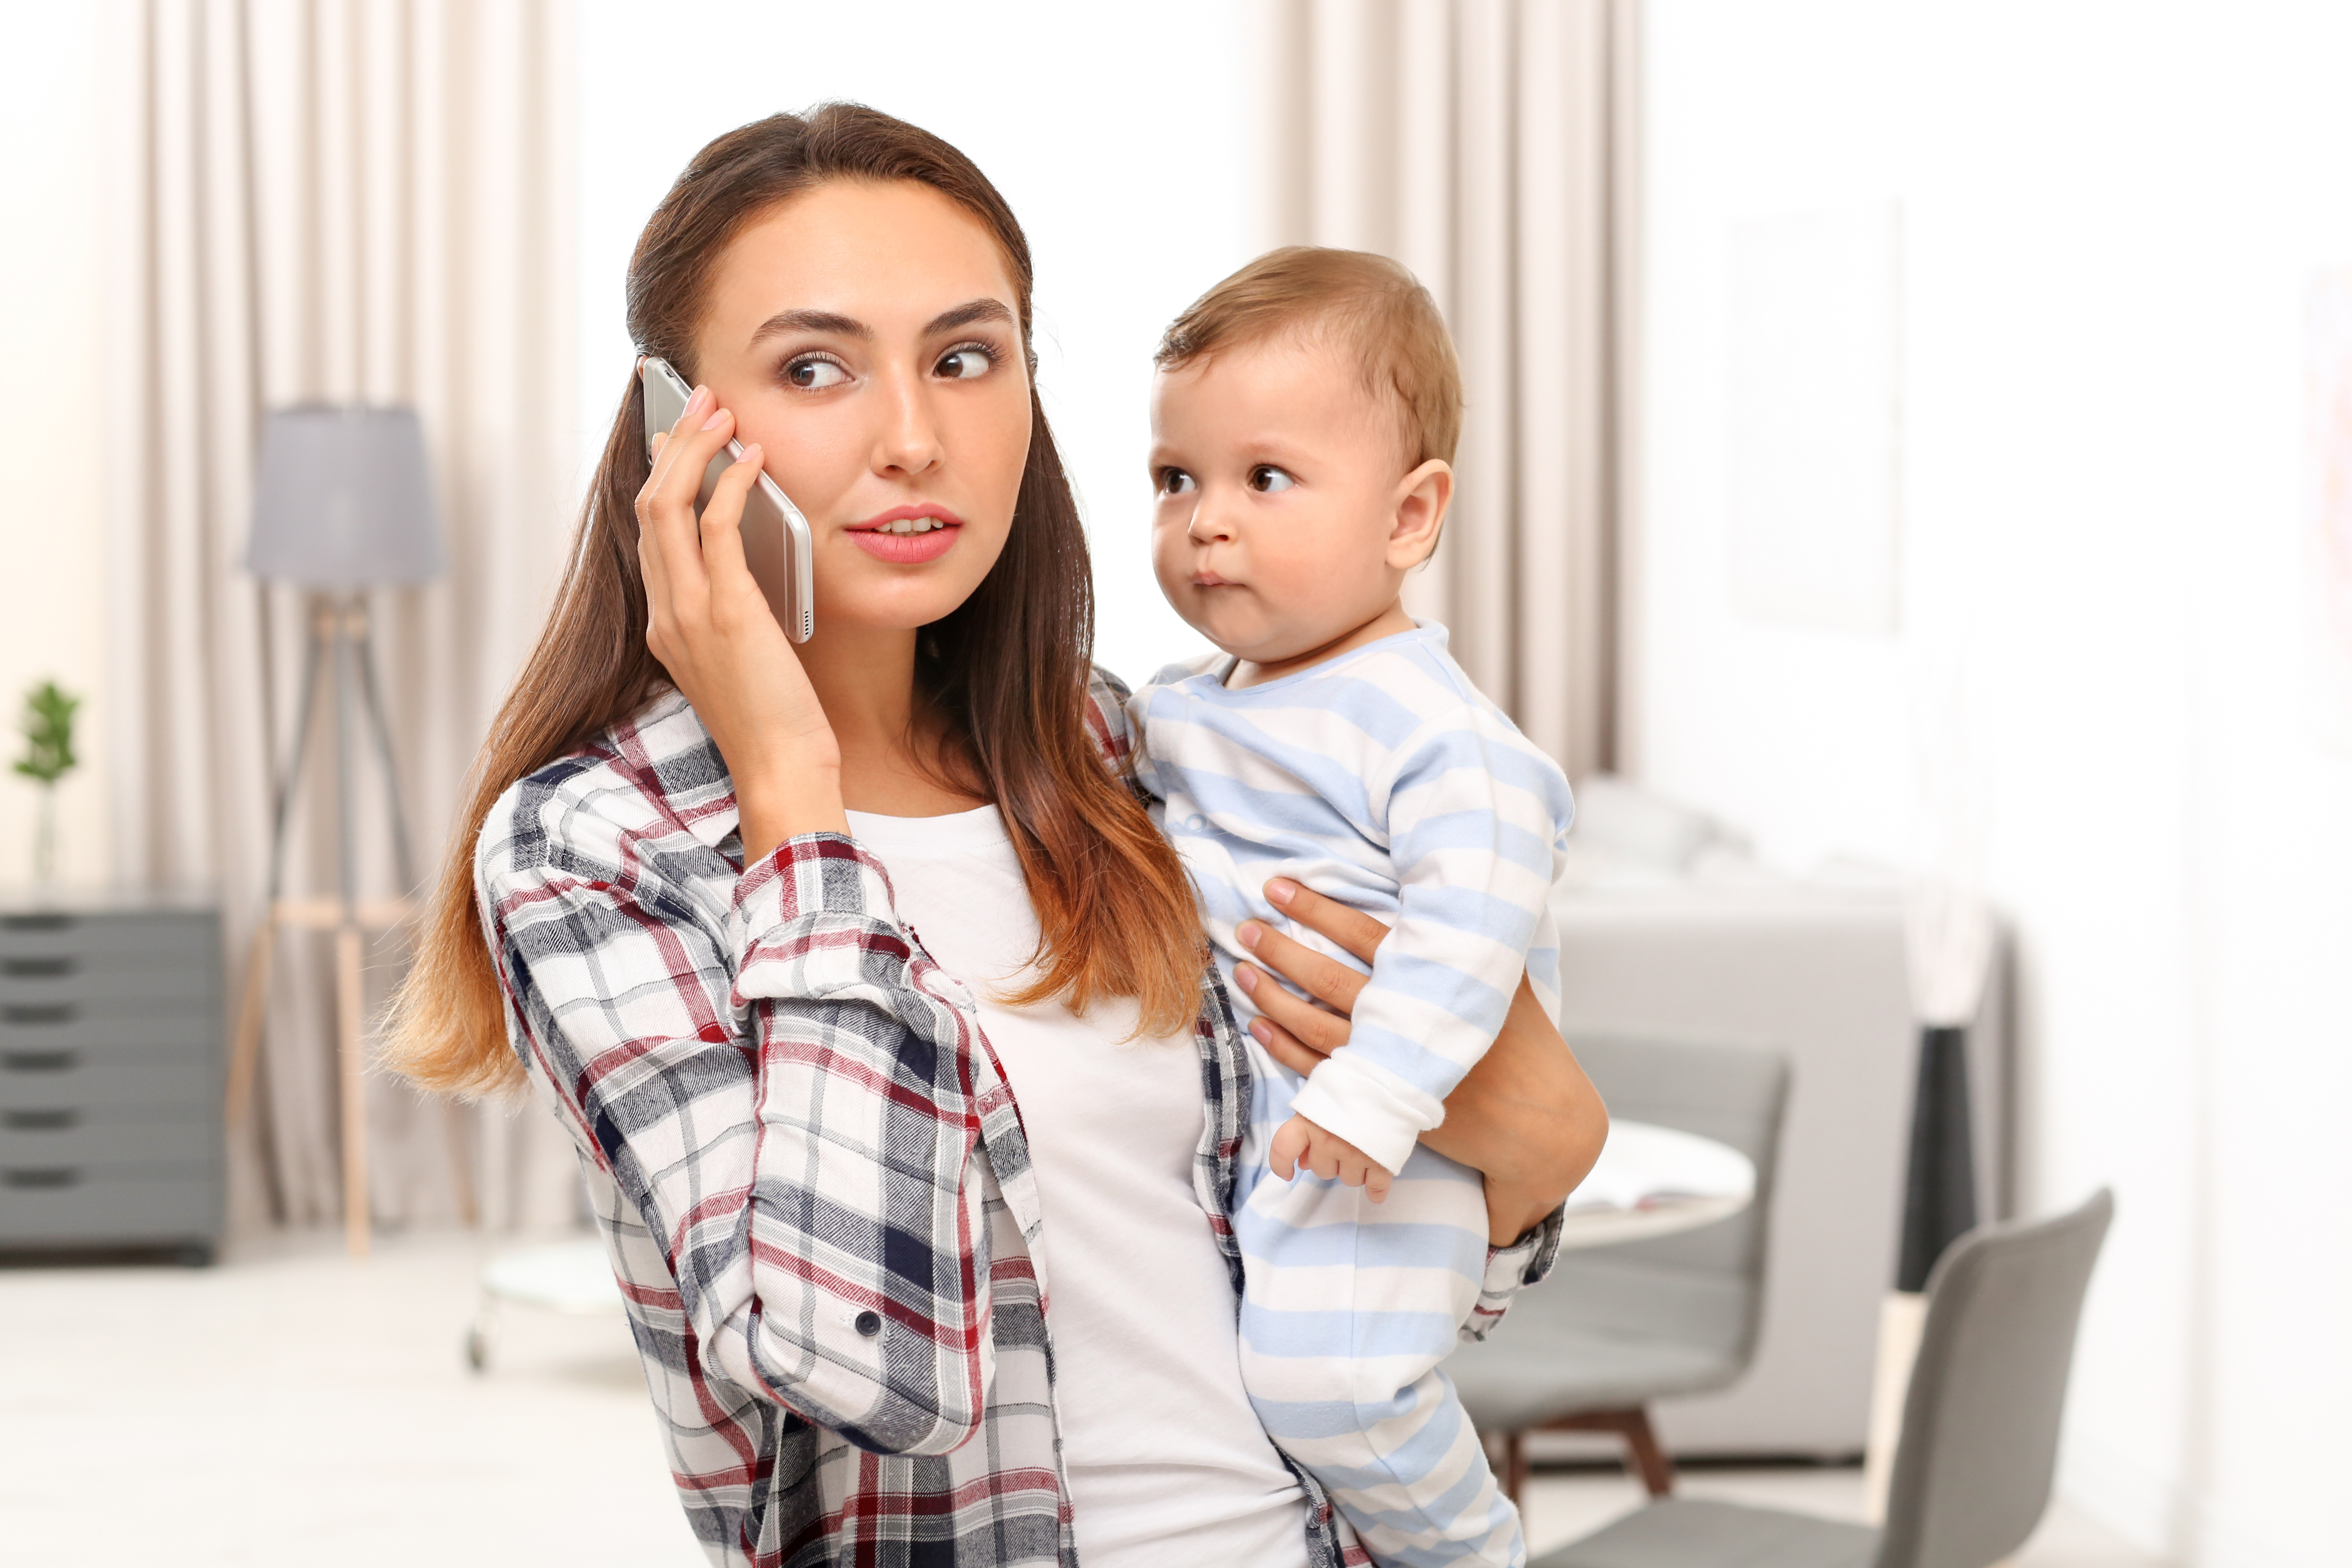 A young mother holding her baby while talking on the phone | Source: Shutterstock